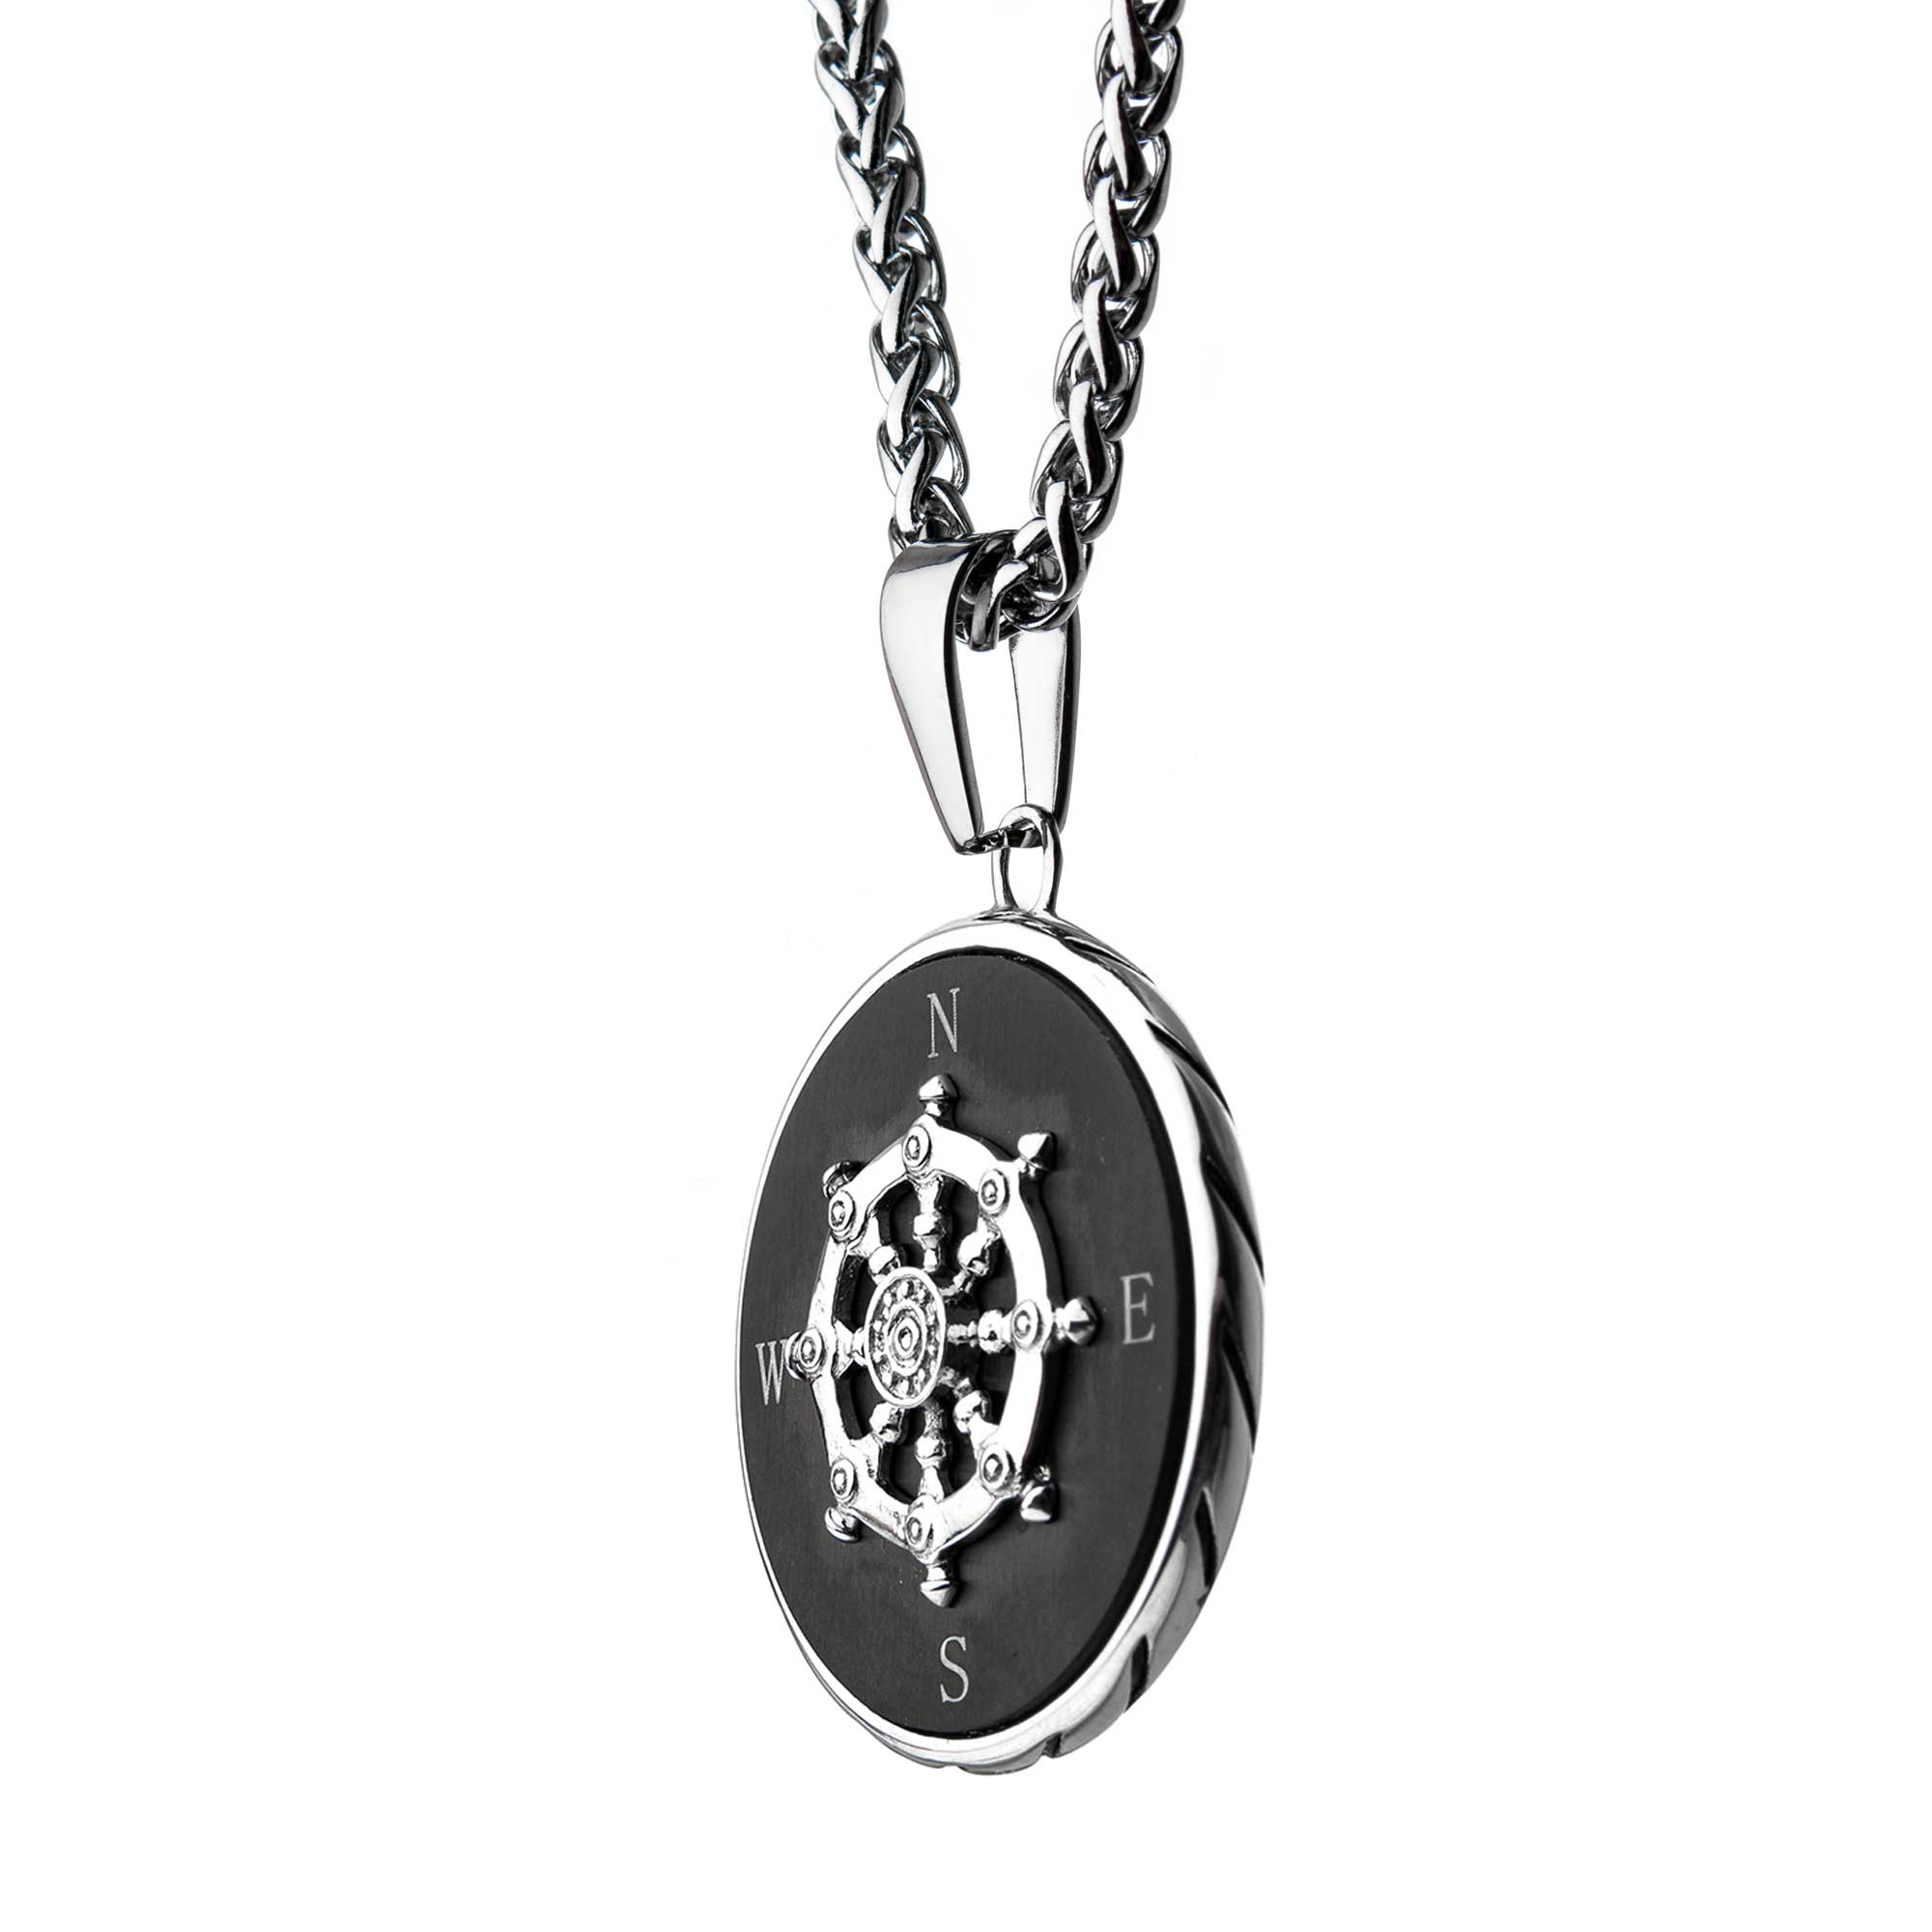 Stainless Steel Black Plated Ship's Wheel Compass Pendant with Chain Image 3 Enchanted Jewelry Plainfield, CT